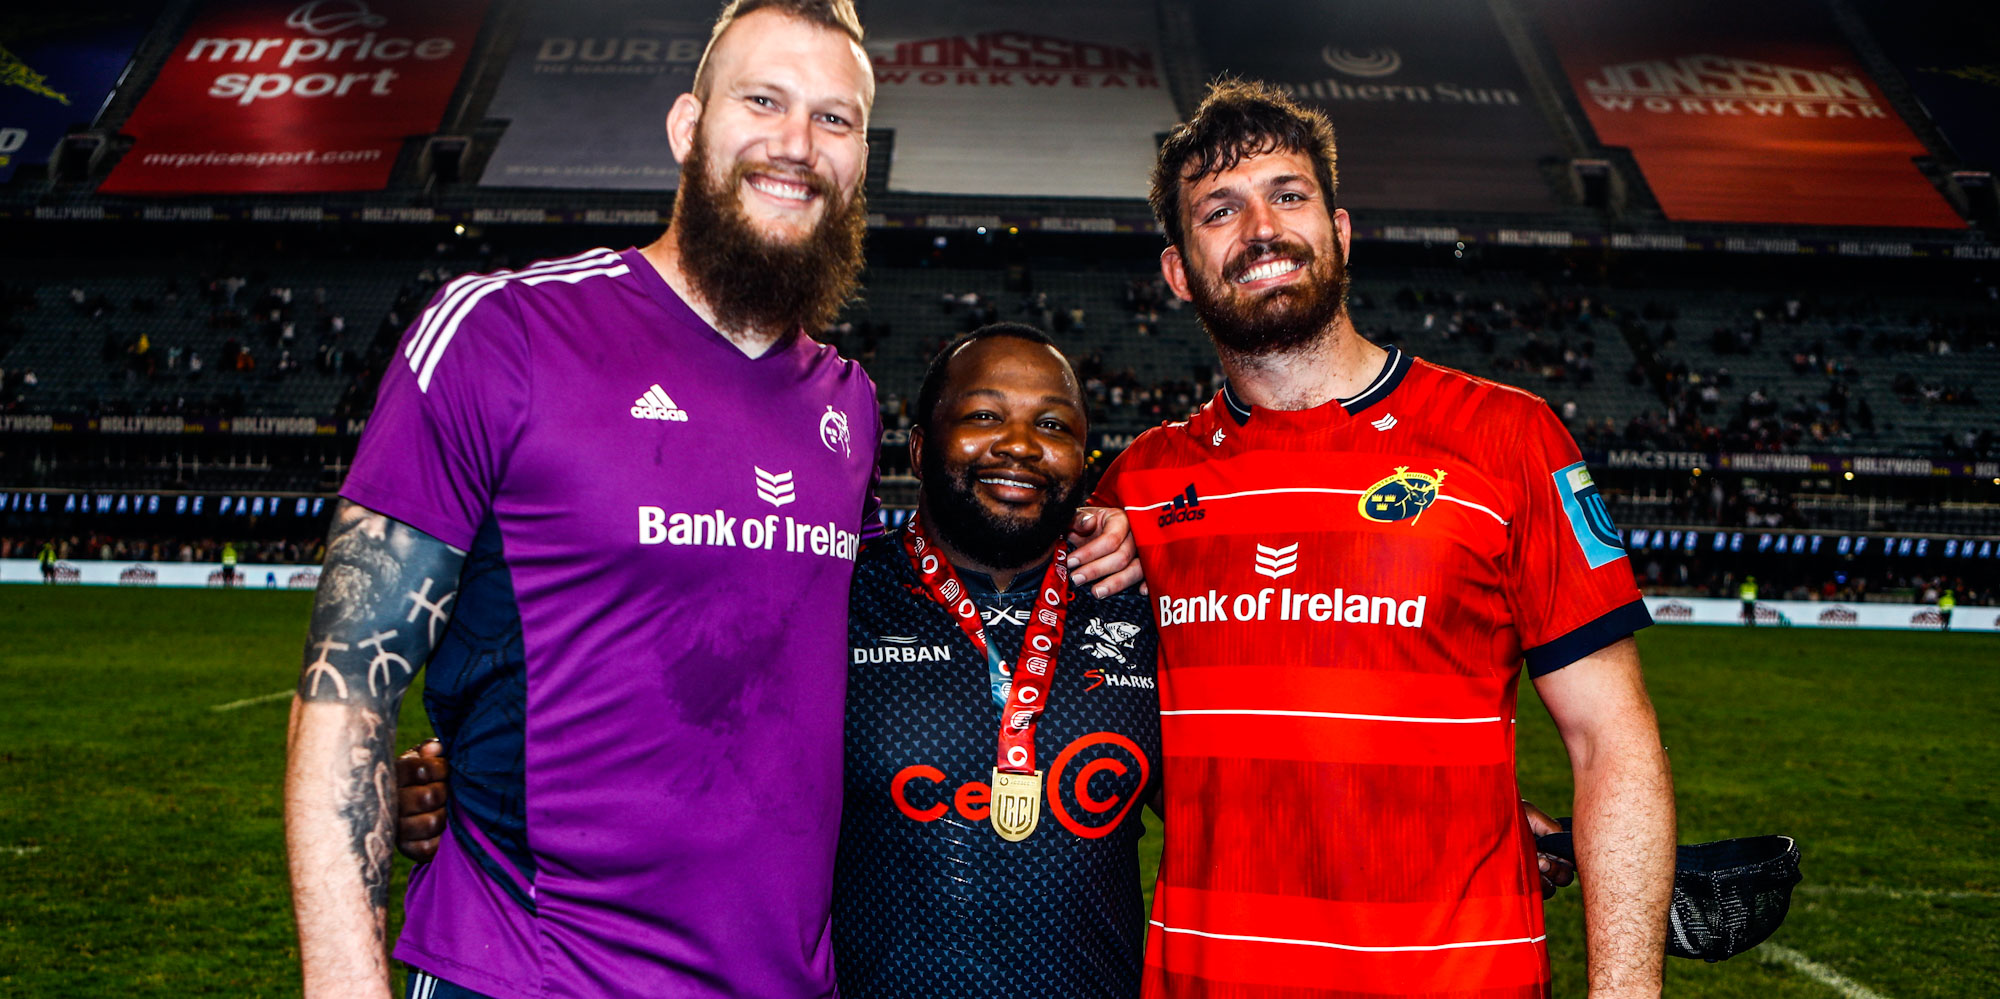 RG Snyman and Jean Kleyn with Ox Nche in the middle after a recent Vodacom URC clash between Munster and the Cell C Sharks in Durban.